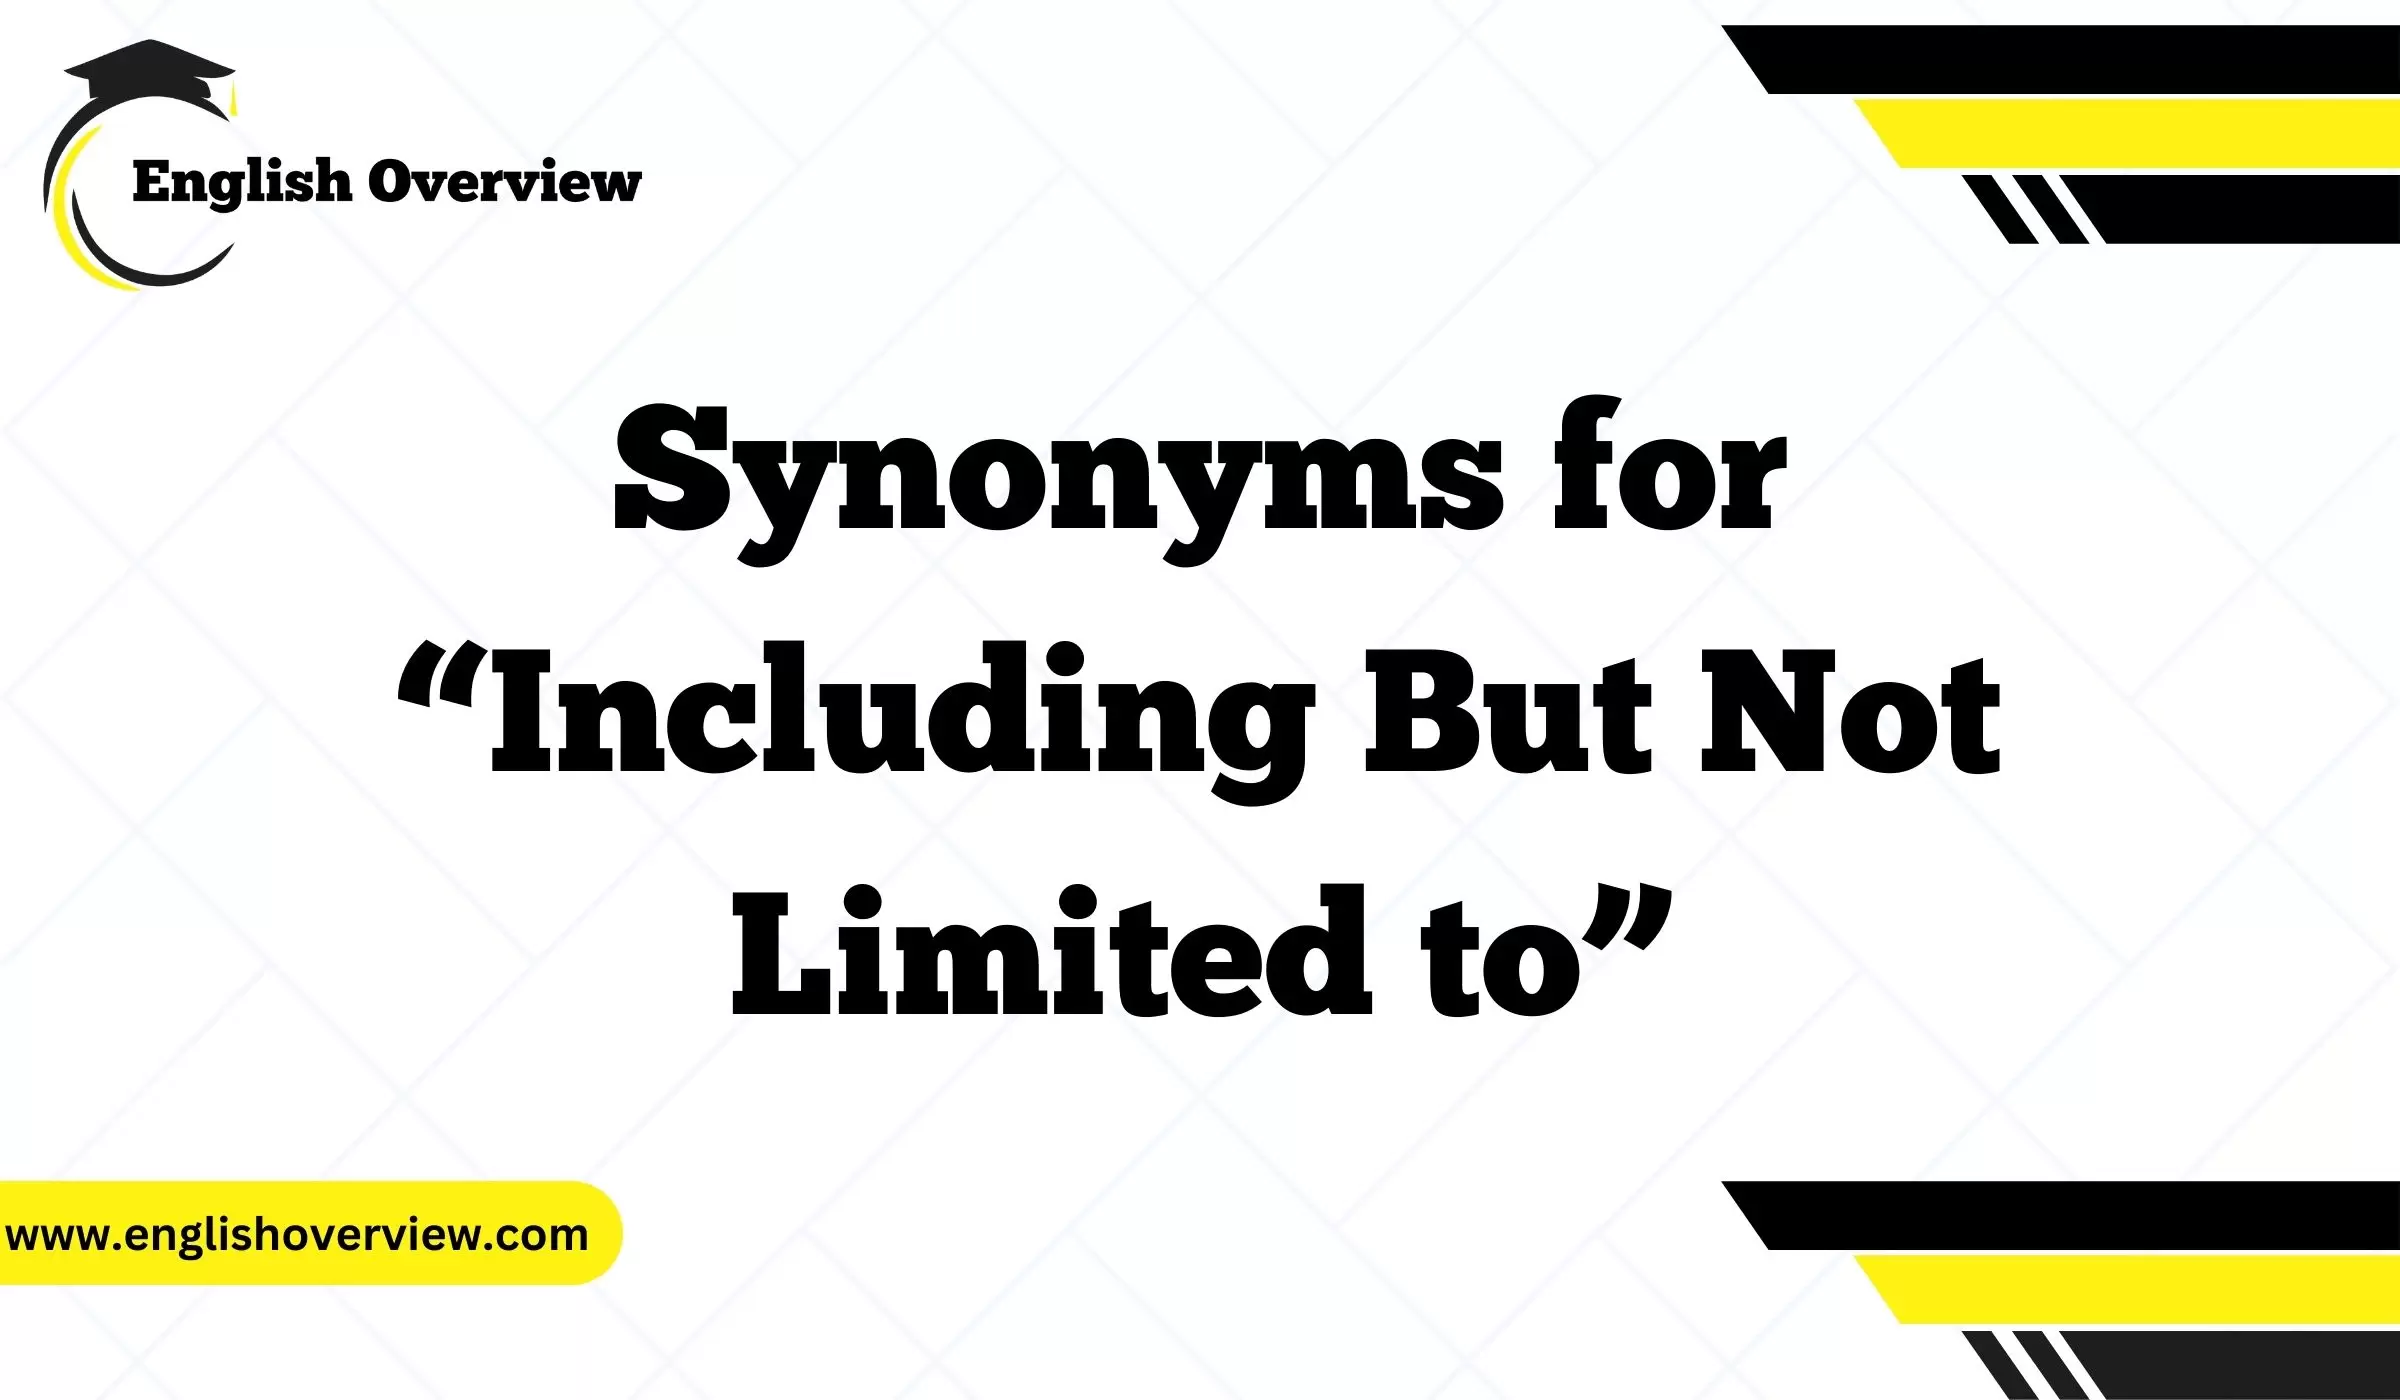 Synonyms for “Including But Not Limited to”